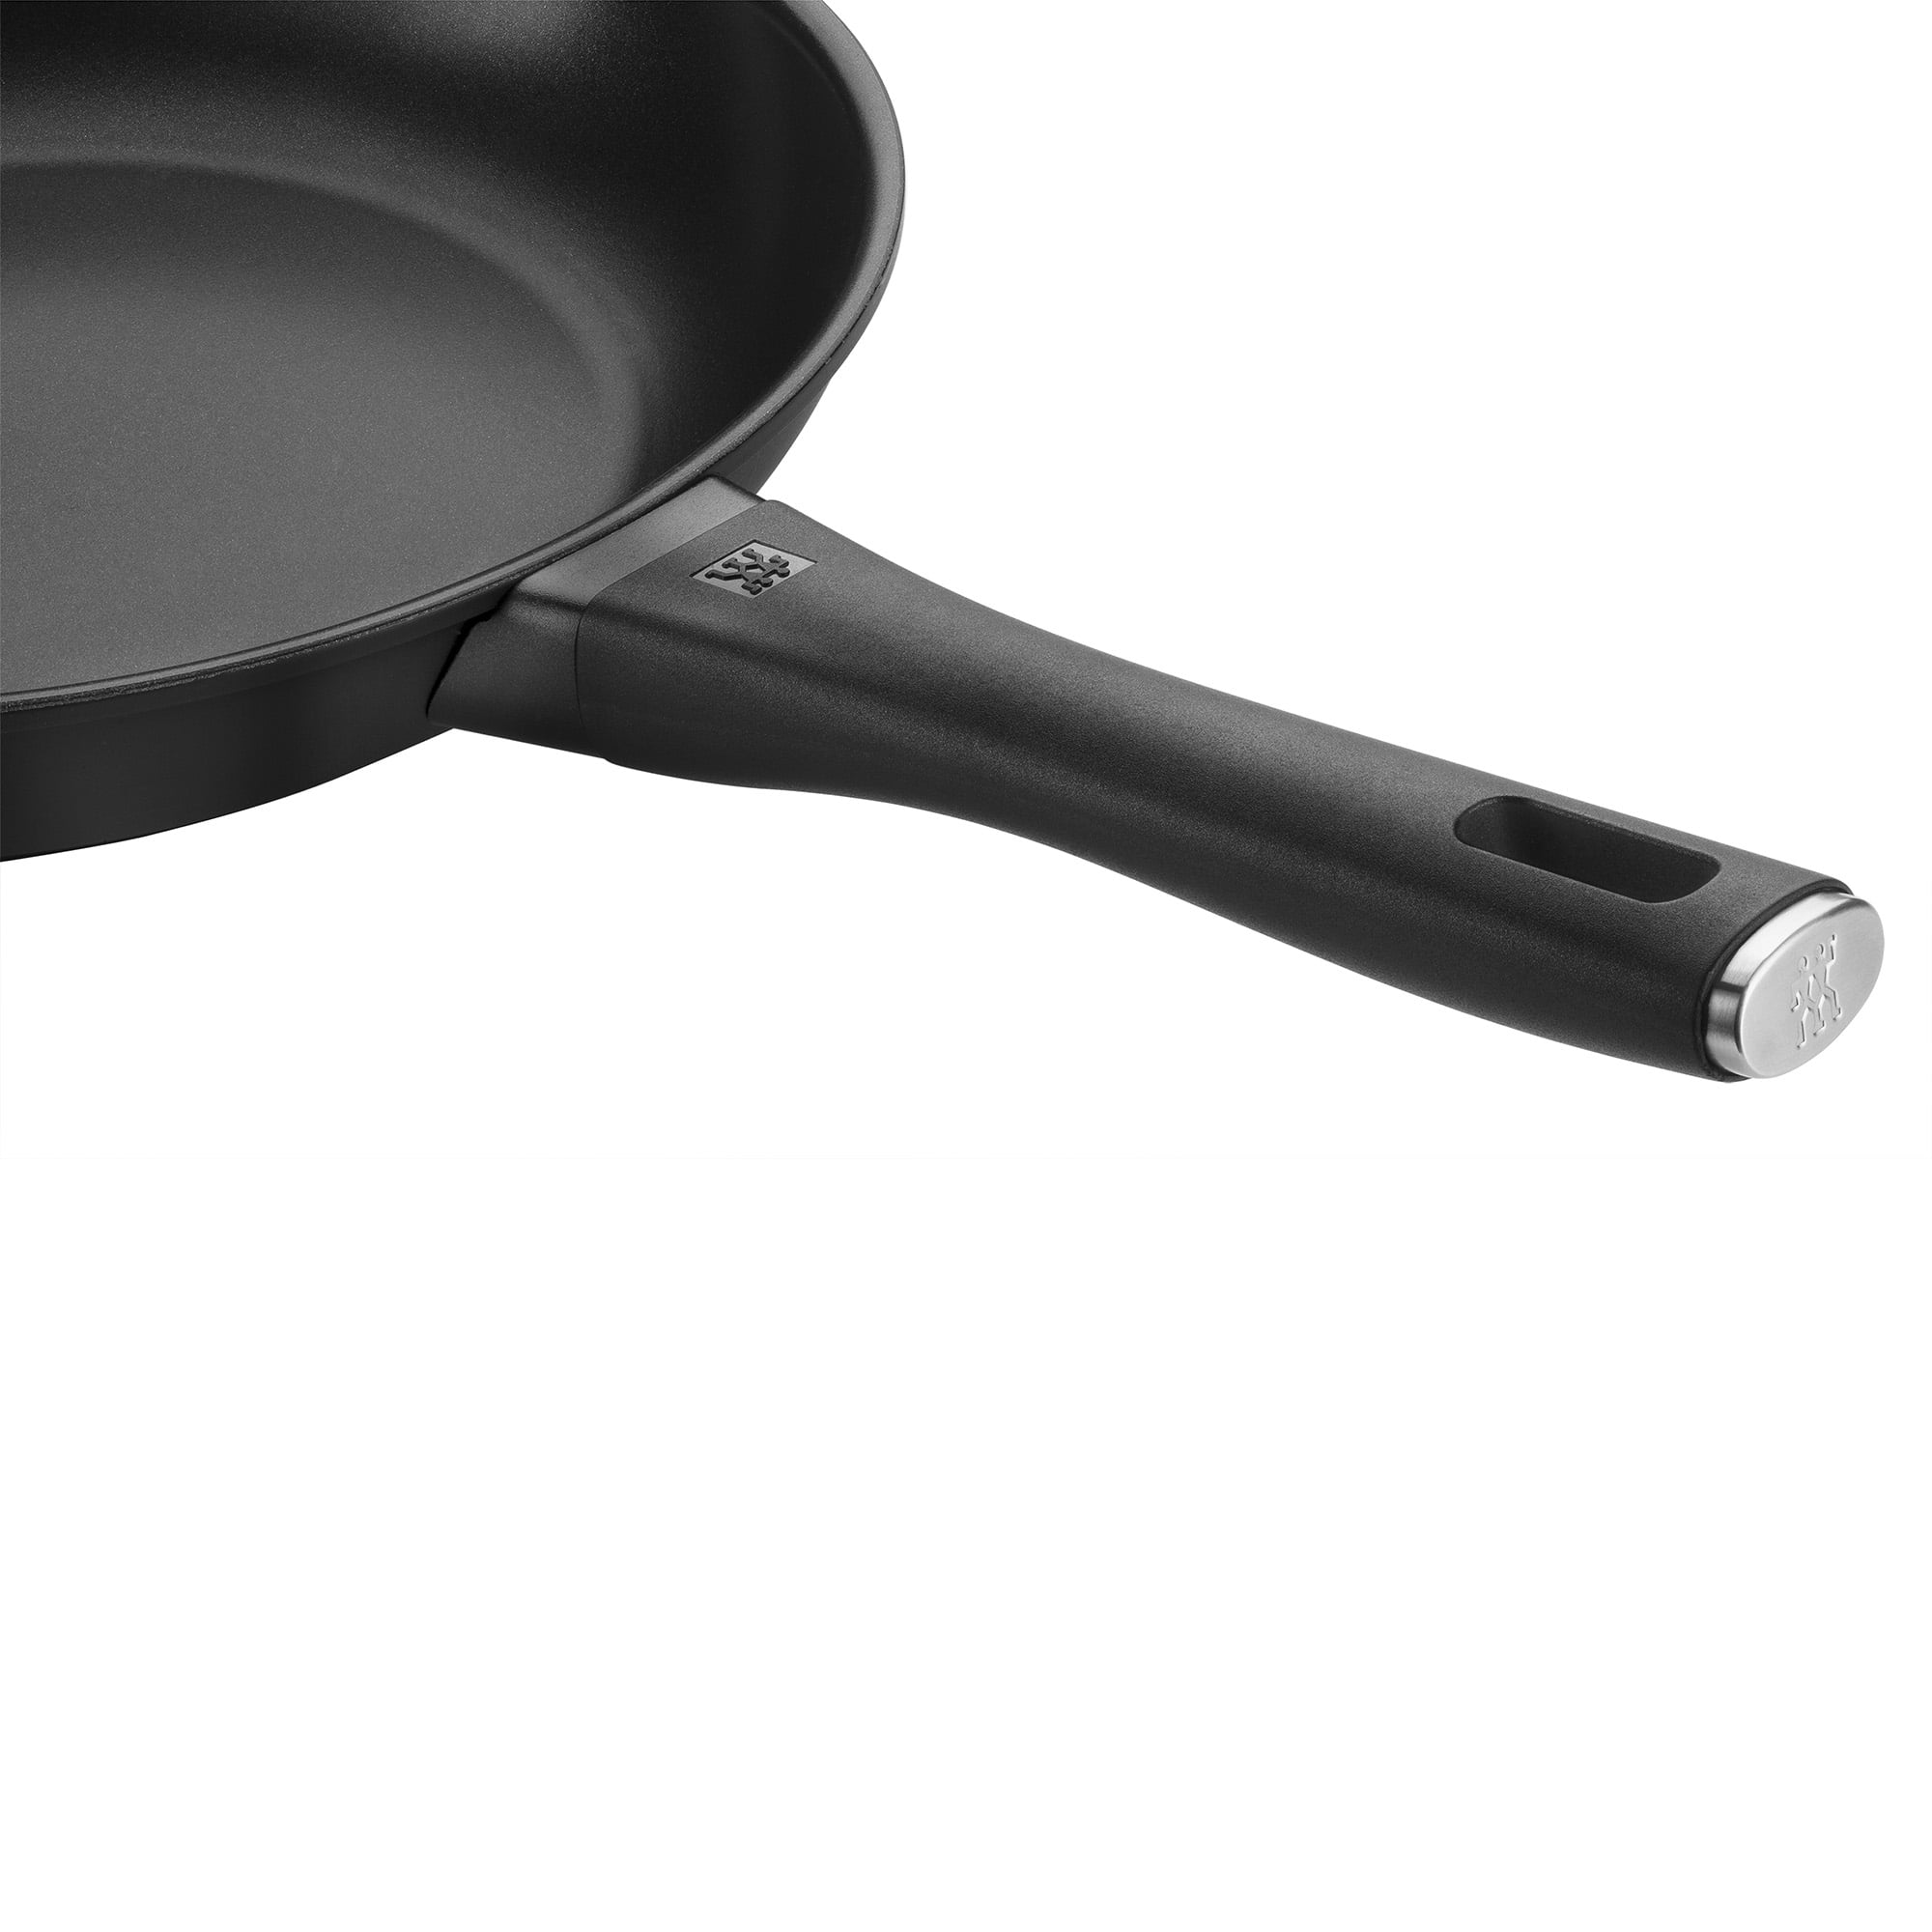 Cookware & More - Zwilling Madura Plus 9.5 & 11 Frypan Set (66299-004)